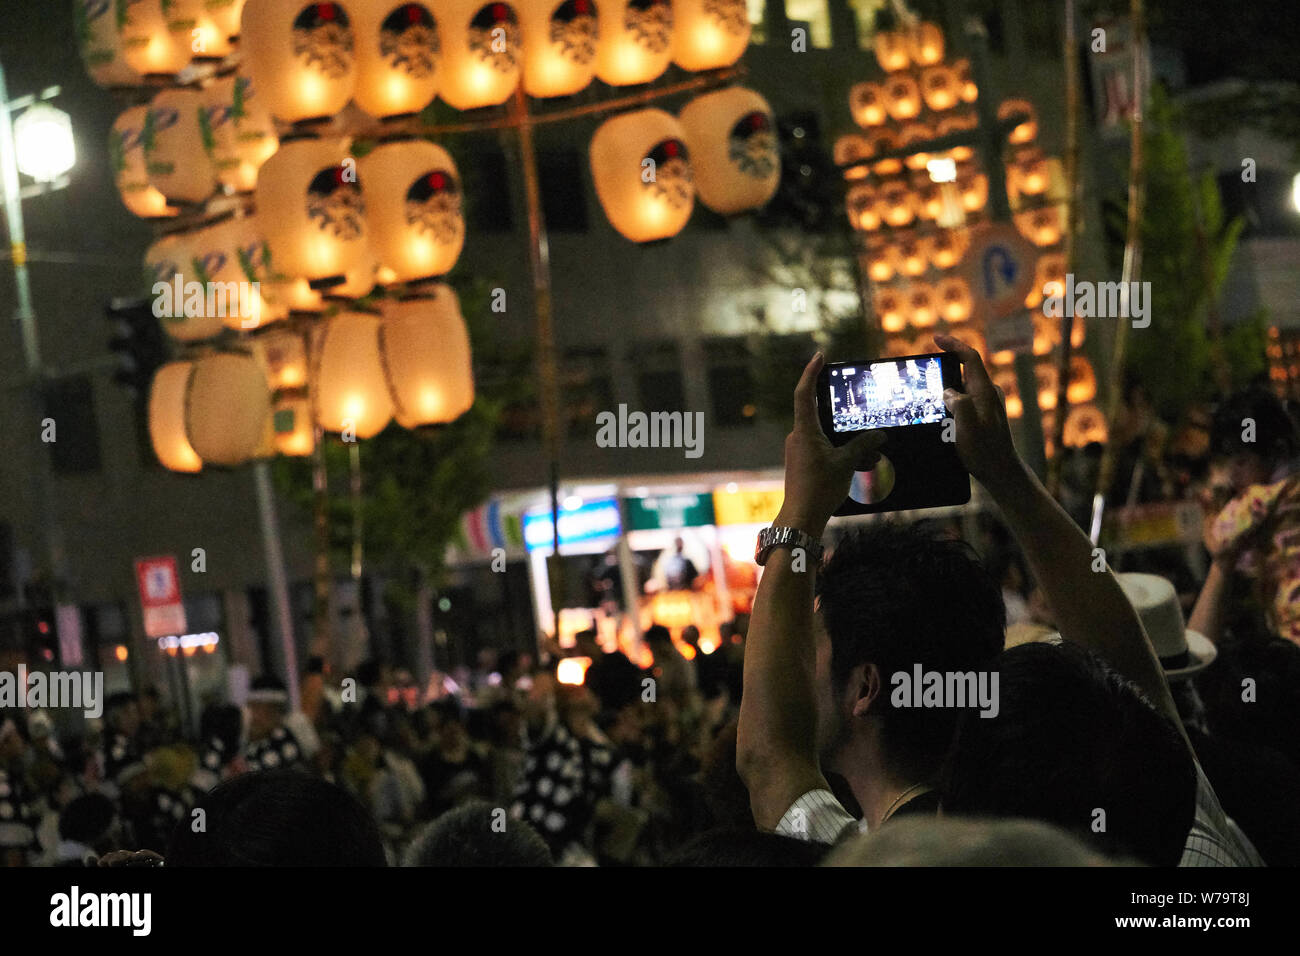 A man takes a smartphone photo as traditional candlelit Japanese lanterns are raised on bamboo poles and paraded at the Akita Kanto Matsuri Festival. Stock Photo